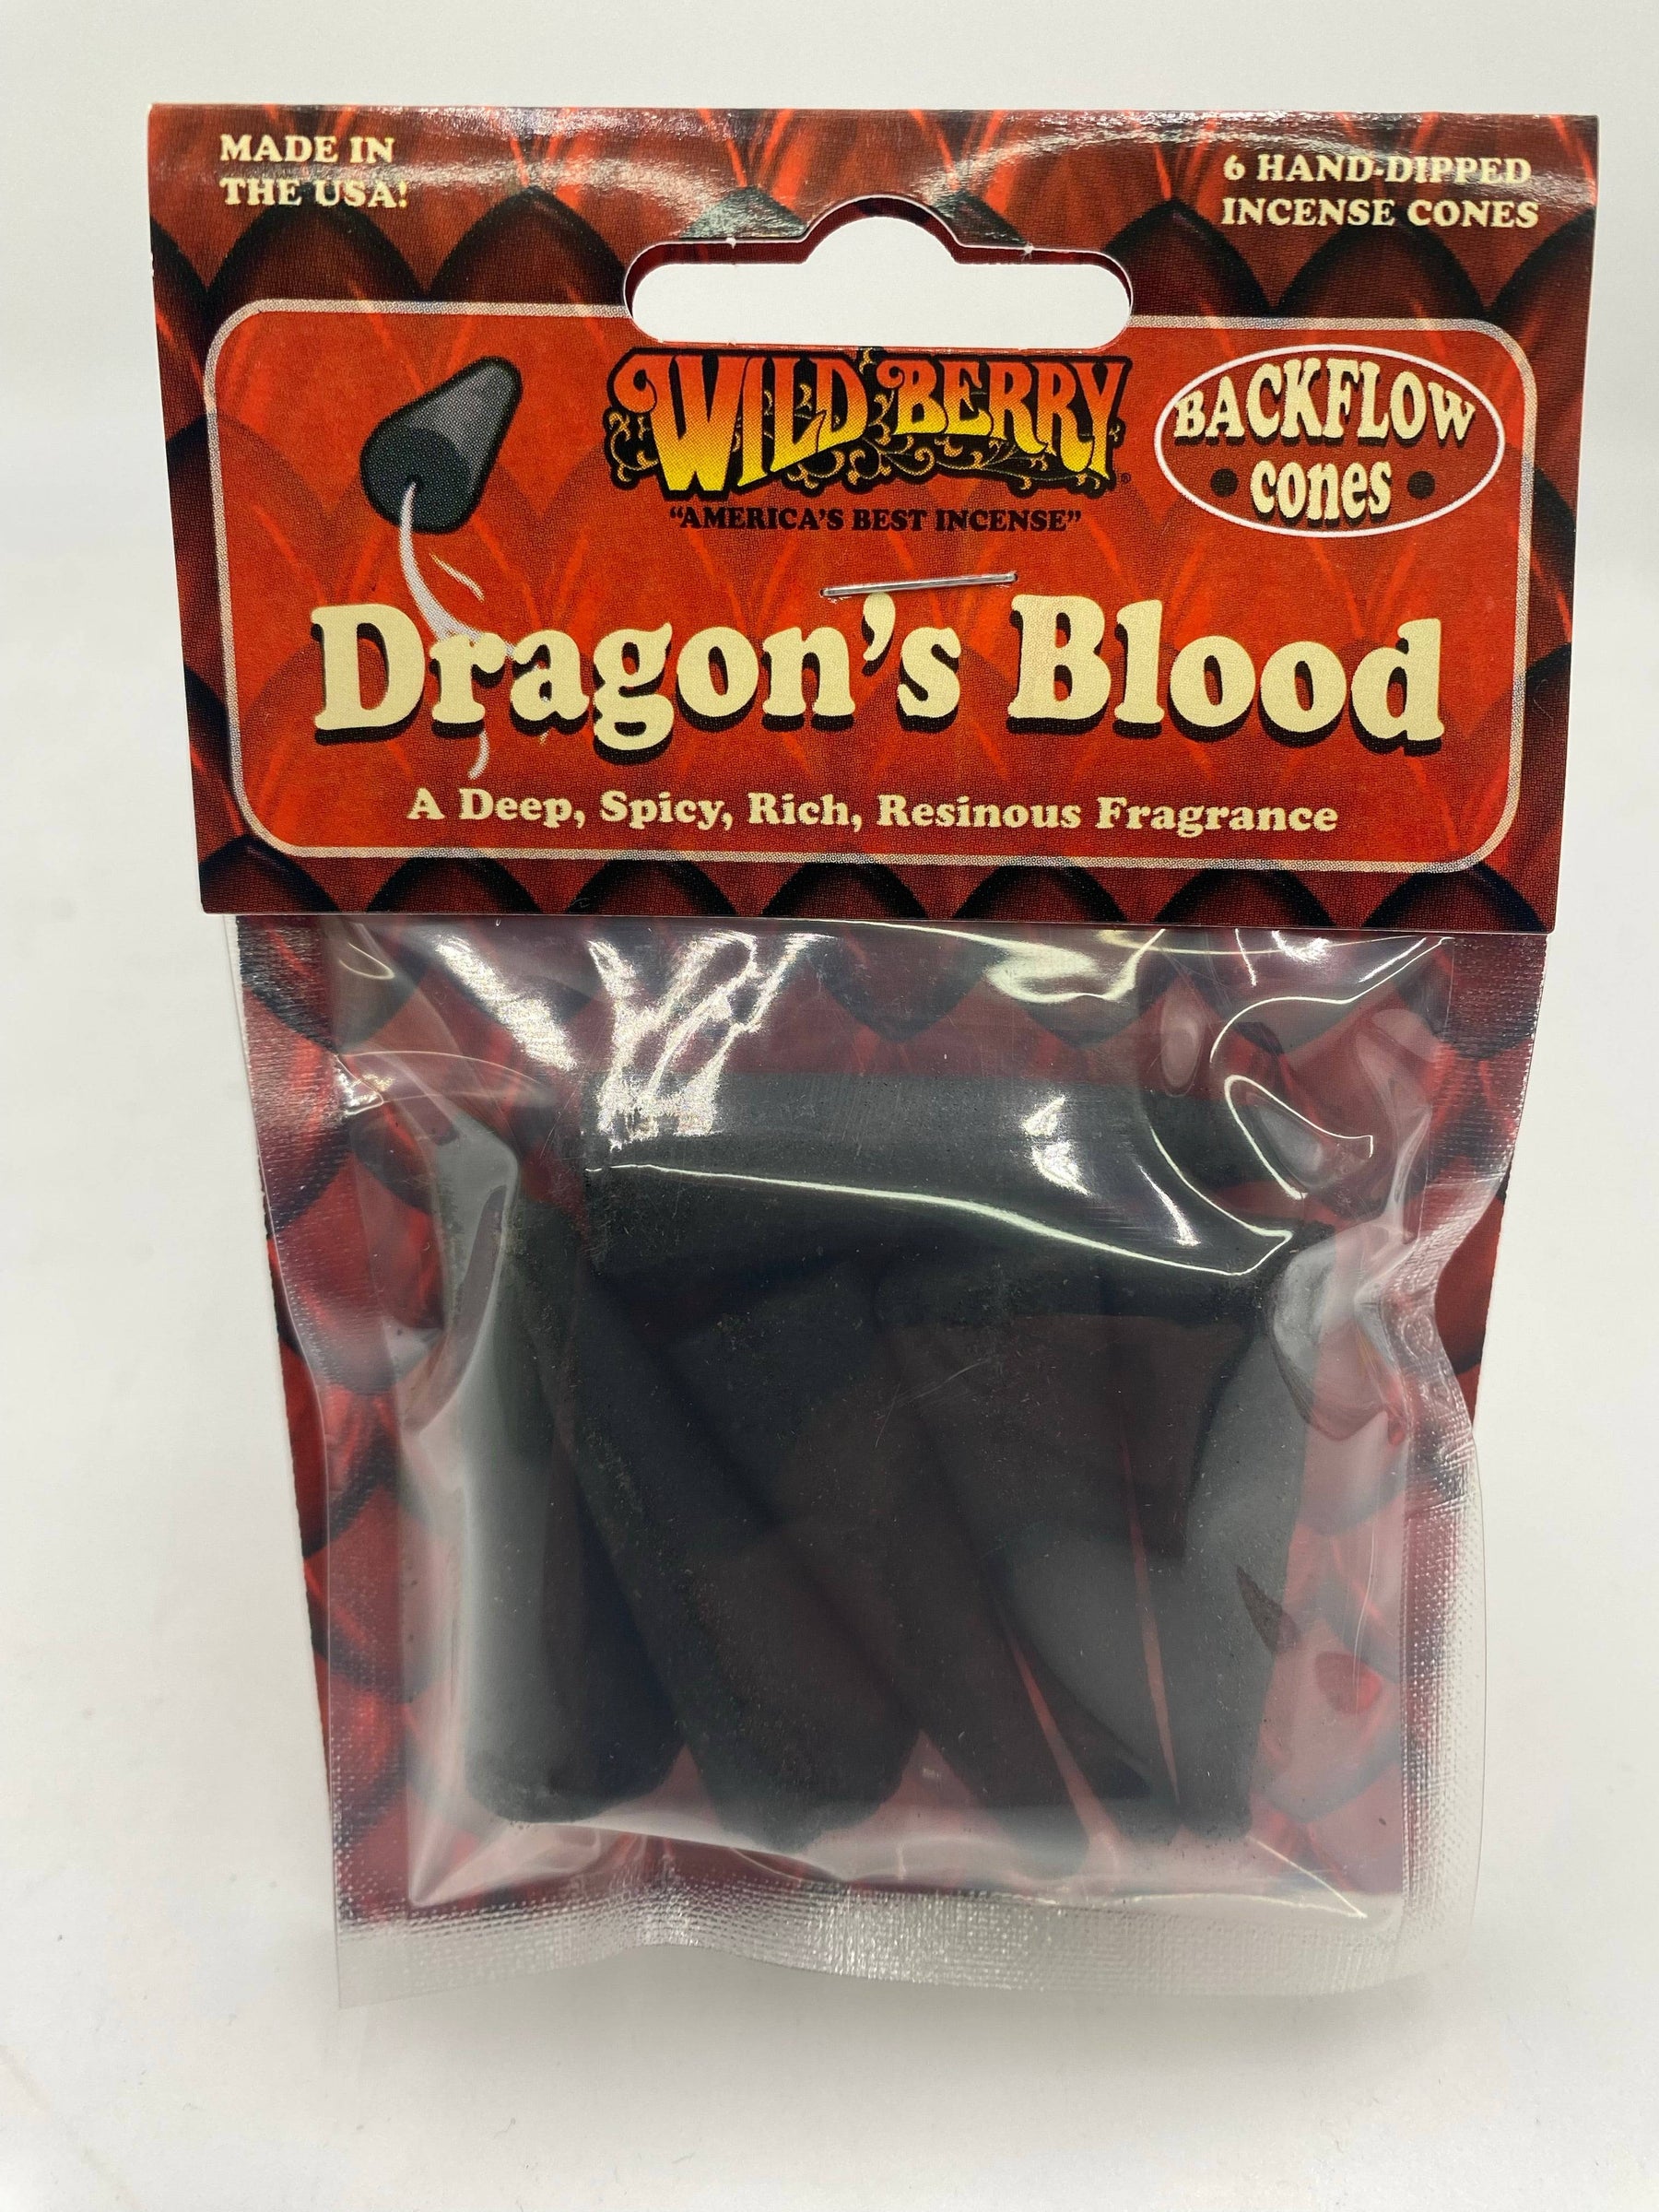 WILDBERRY BACK FLOW CONES DRAGON'S BLOOD 6 CT BAG